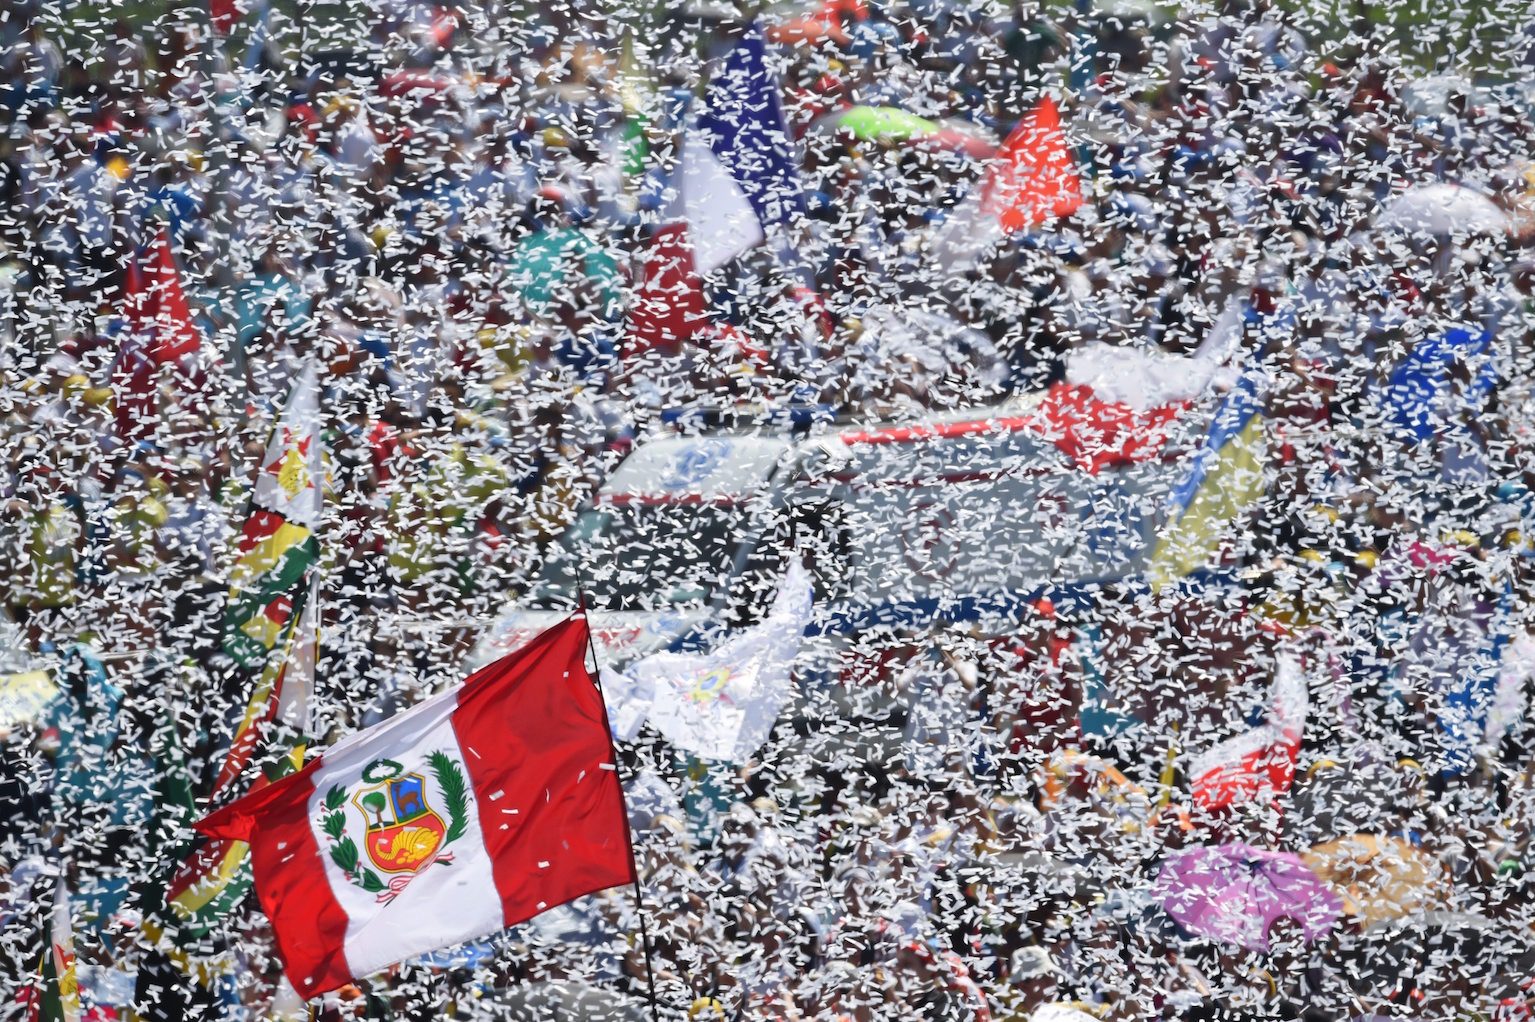 NEXT HOST. Confetti falls over pilgrims on July 31, 2016 after Pope Francis (not seen) announced Panama will host World Youth Day 2019. Photo by Jacek Turczyk/EPA 